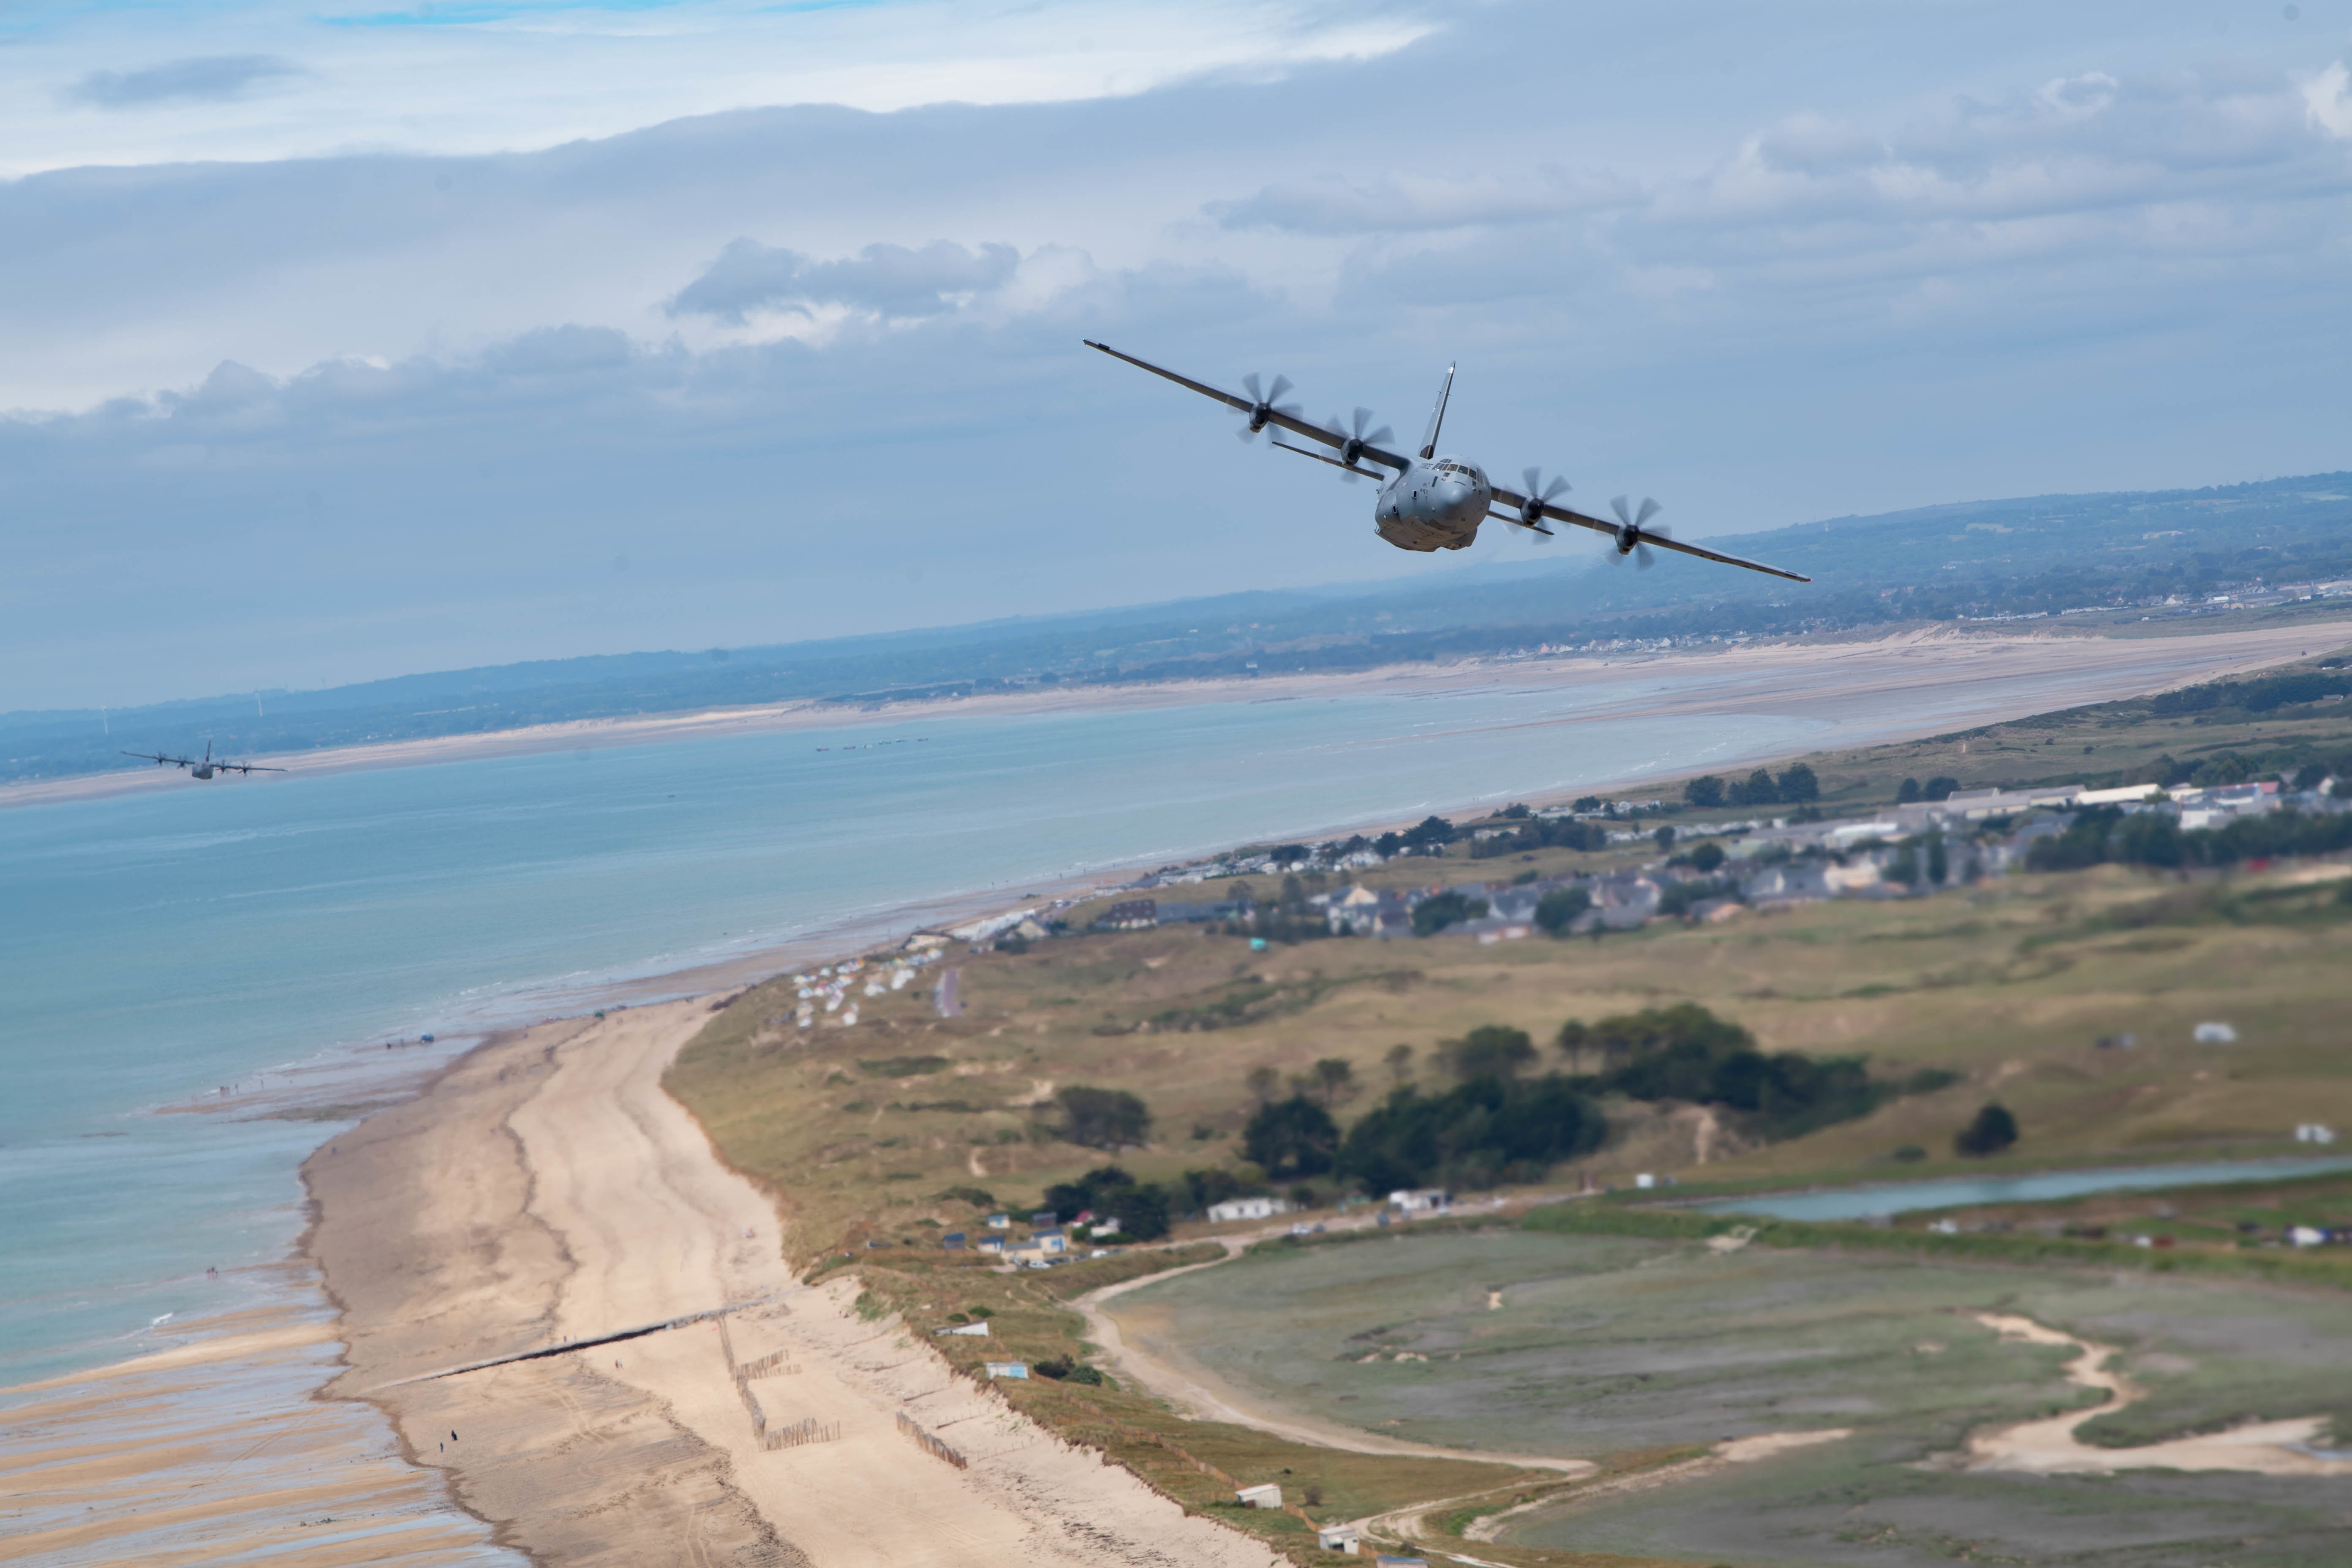 C-130J Super Hercules aircraft assigned to Ramstein Air Base, Germany, fly over the beaches of Normandy June 6, 2021.